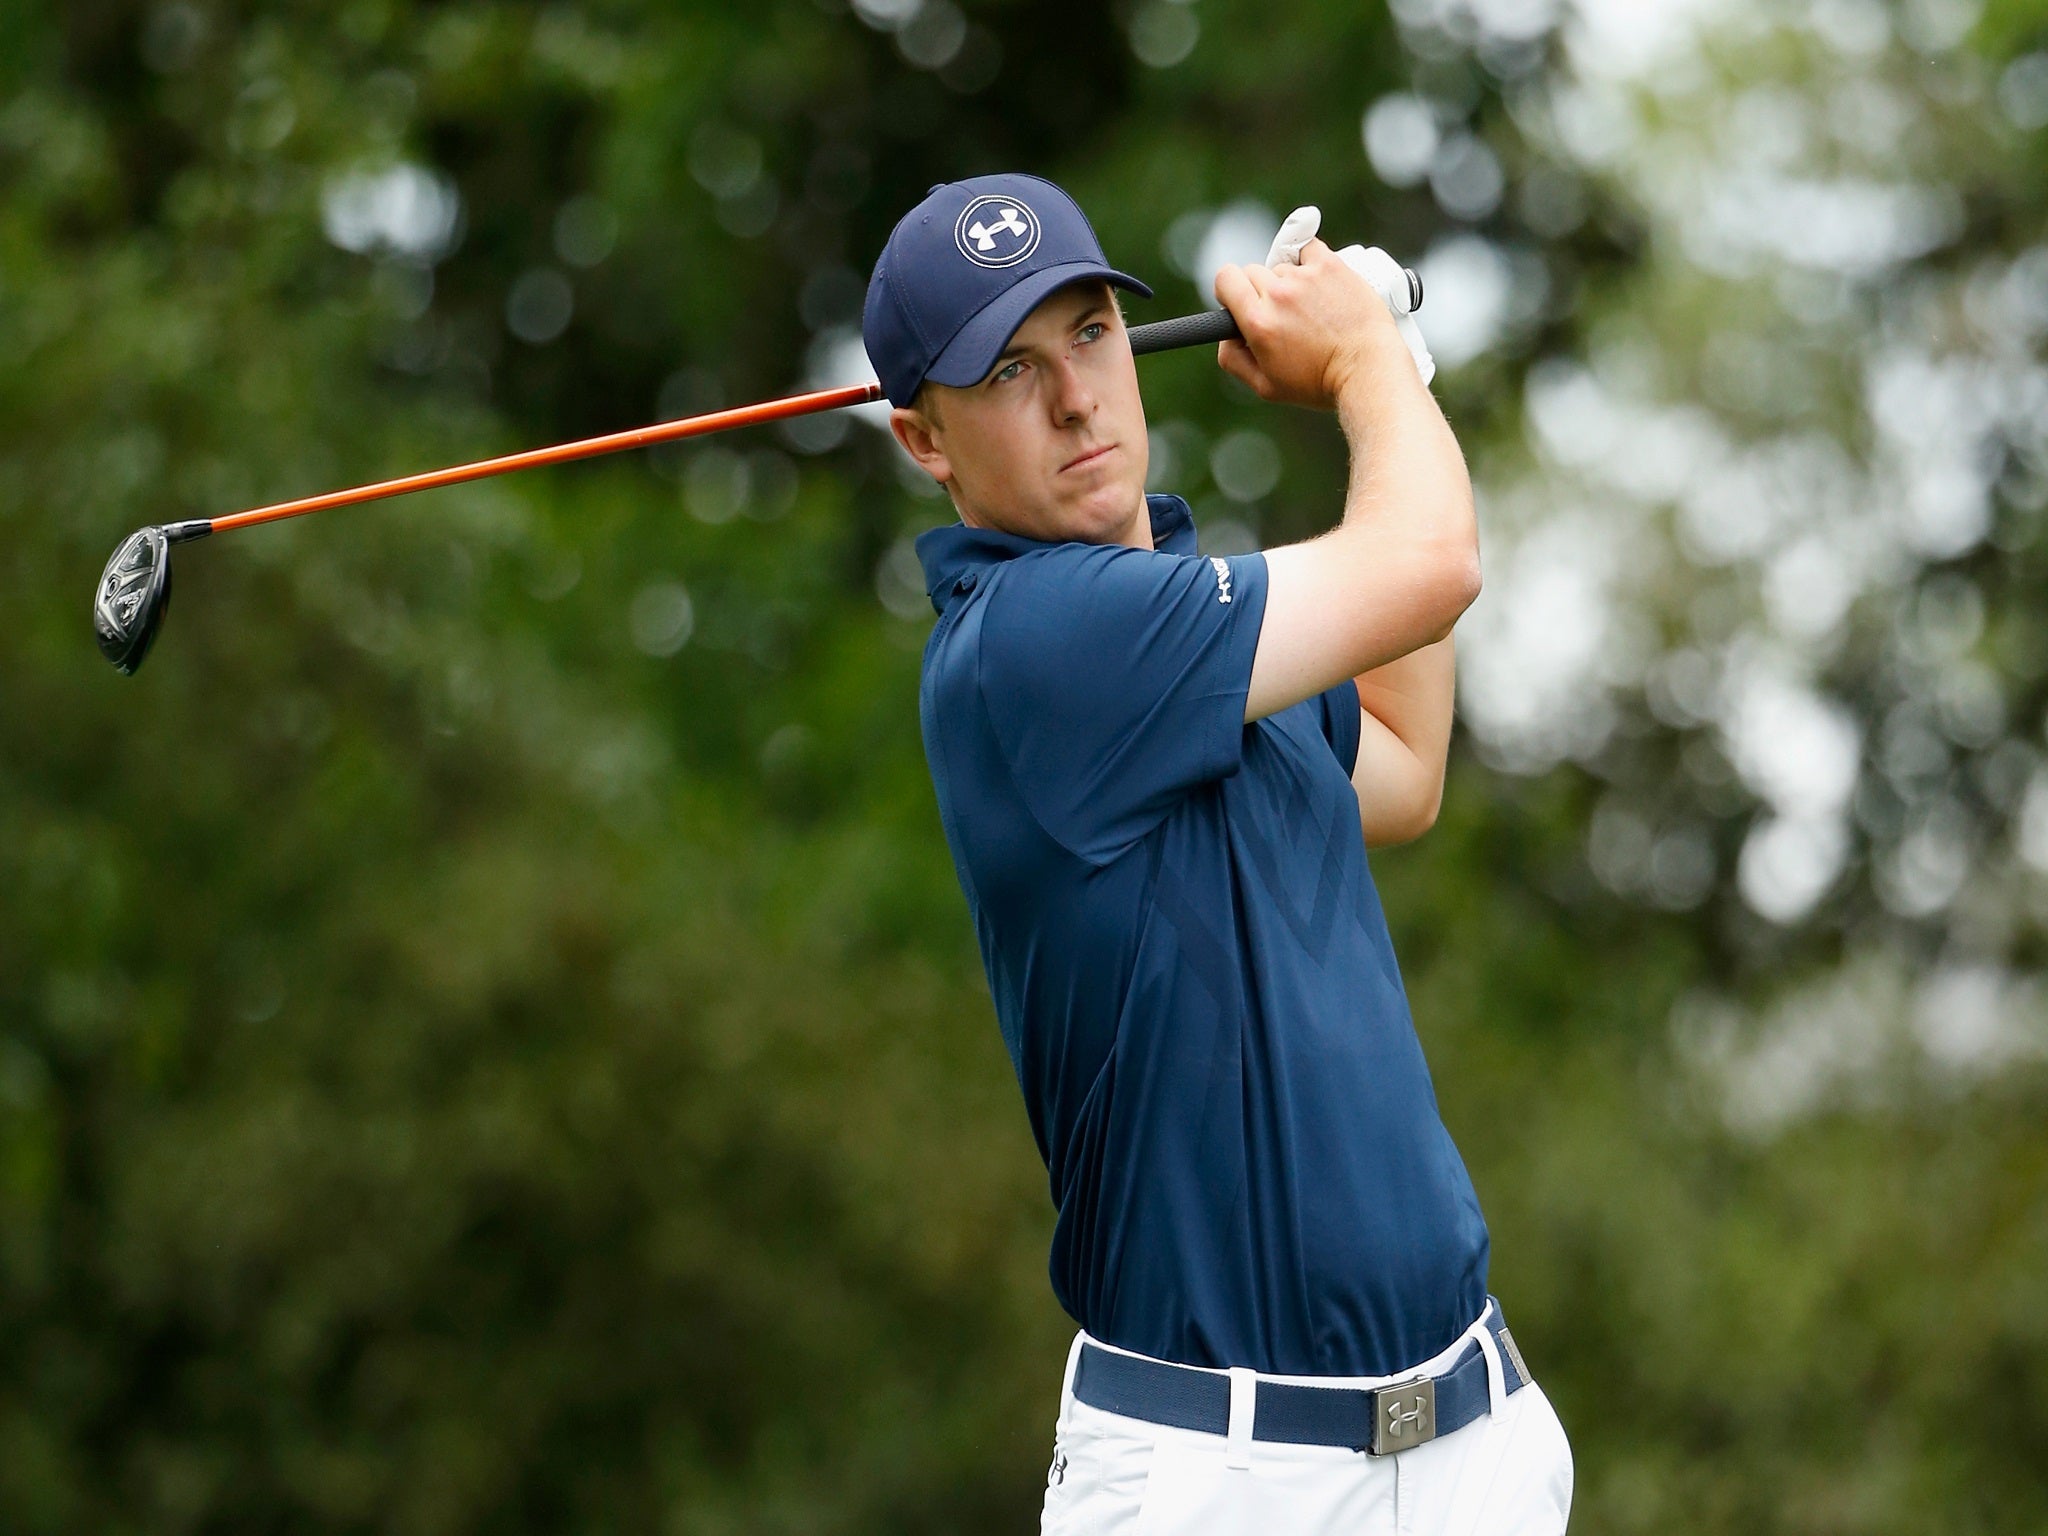 Jordan Spieth looked to maintain his gap to Justin Rose and the rest of the pack